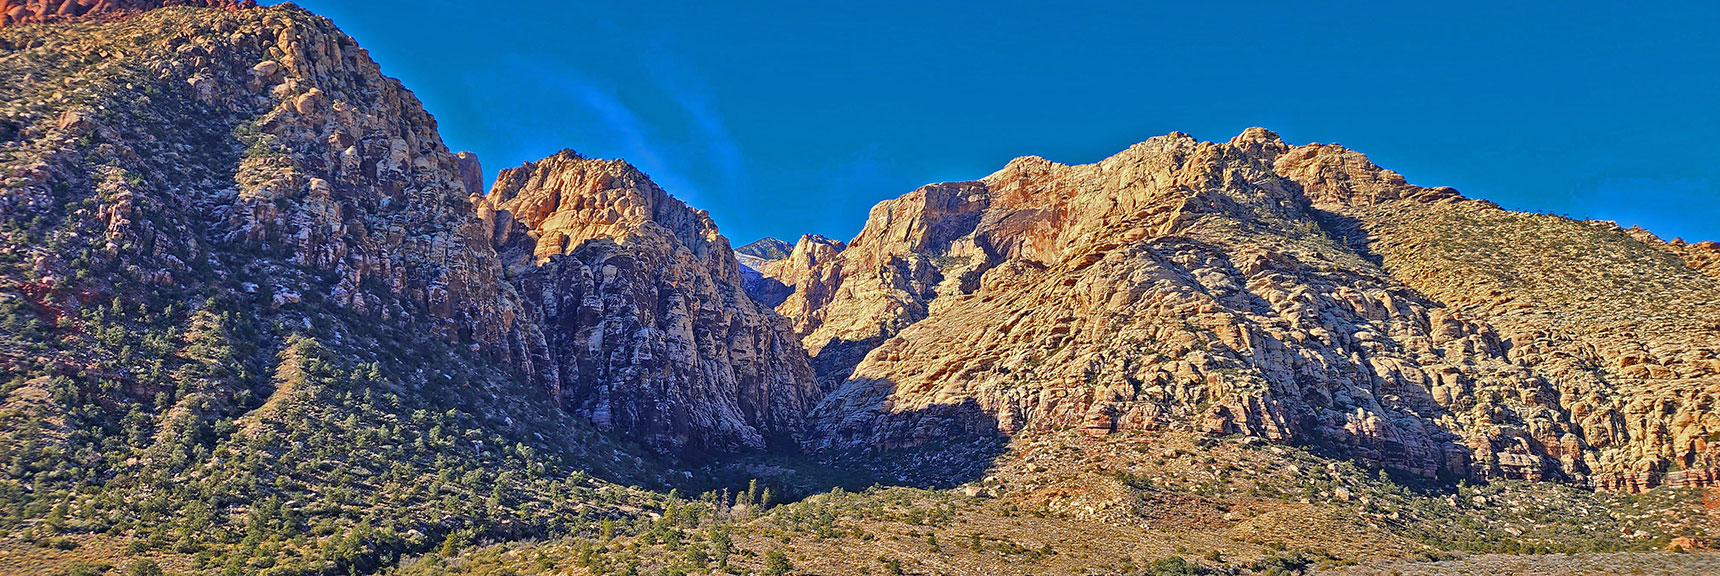 Ice Box Canyon Viewed from the East Across the Red Rock Canyon Scenic Highway | Ice Box Canyon | Red Rock Canyon National Conservation Area, Nevada